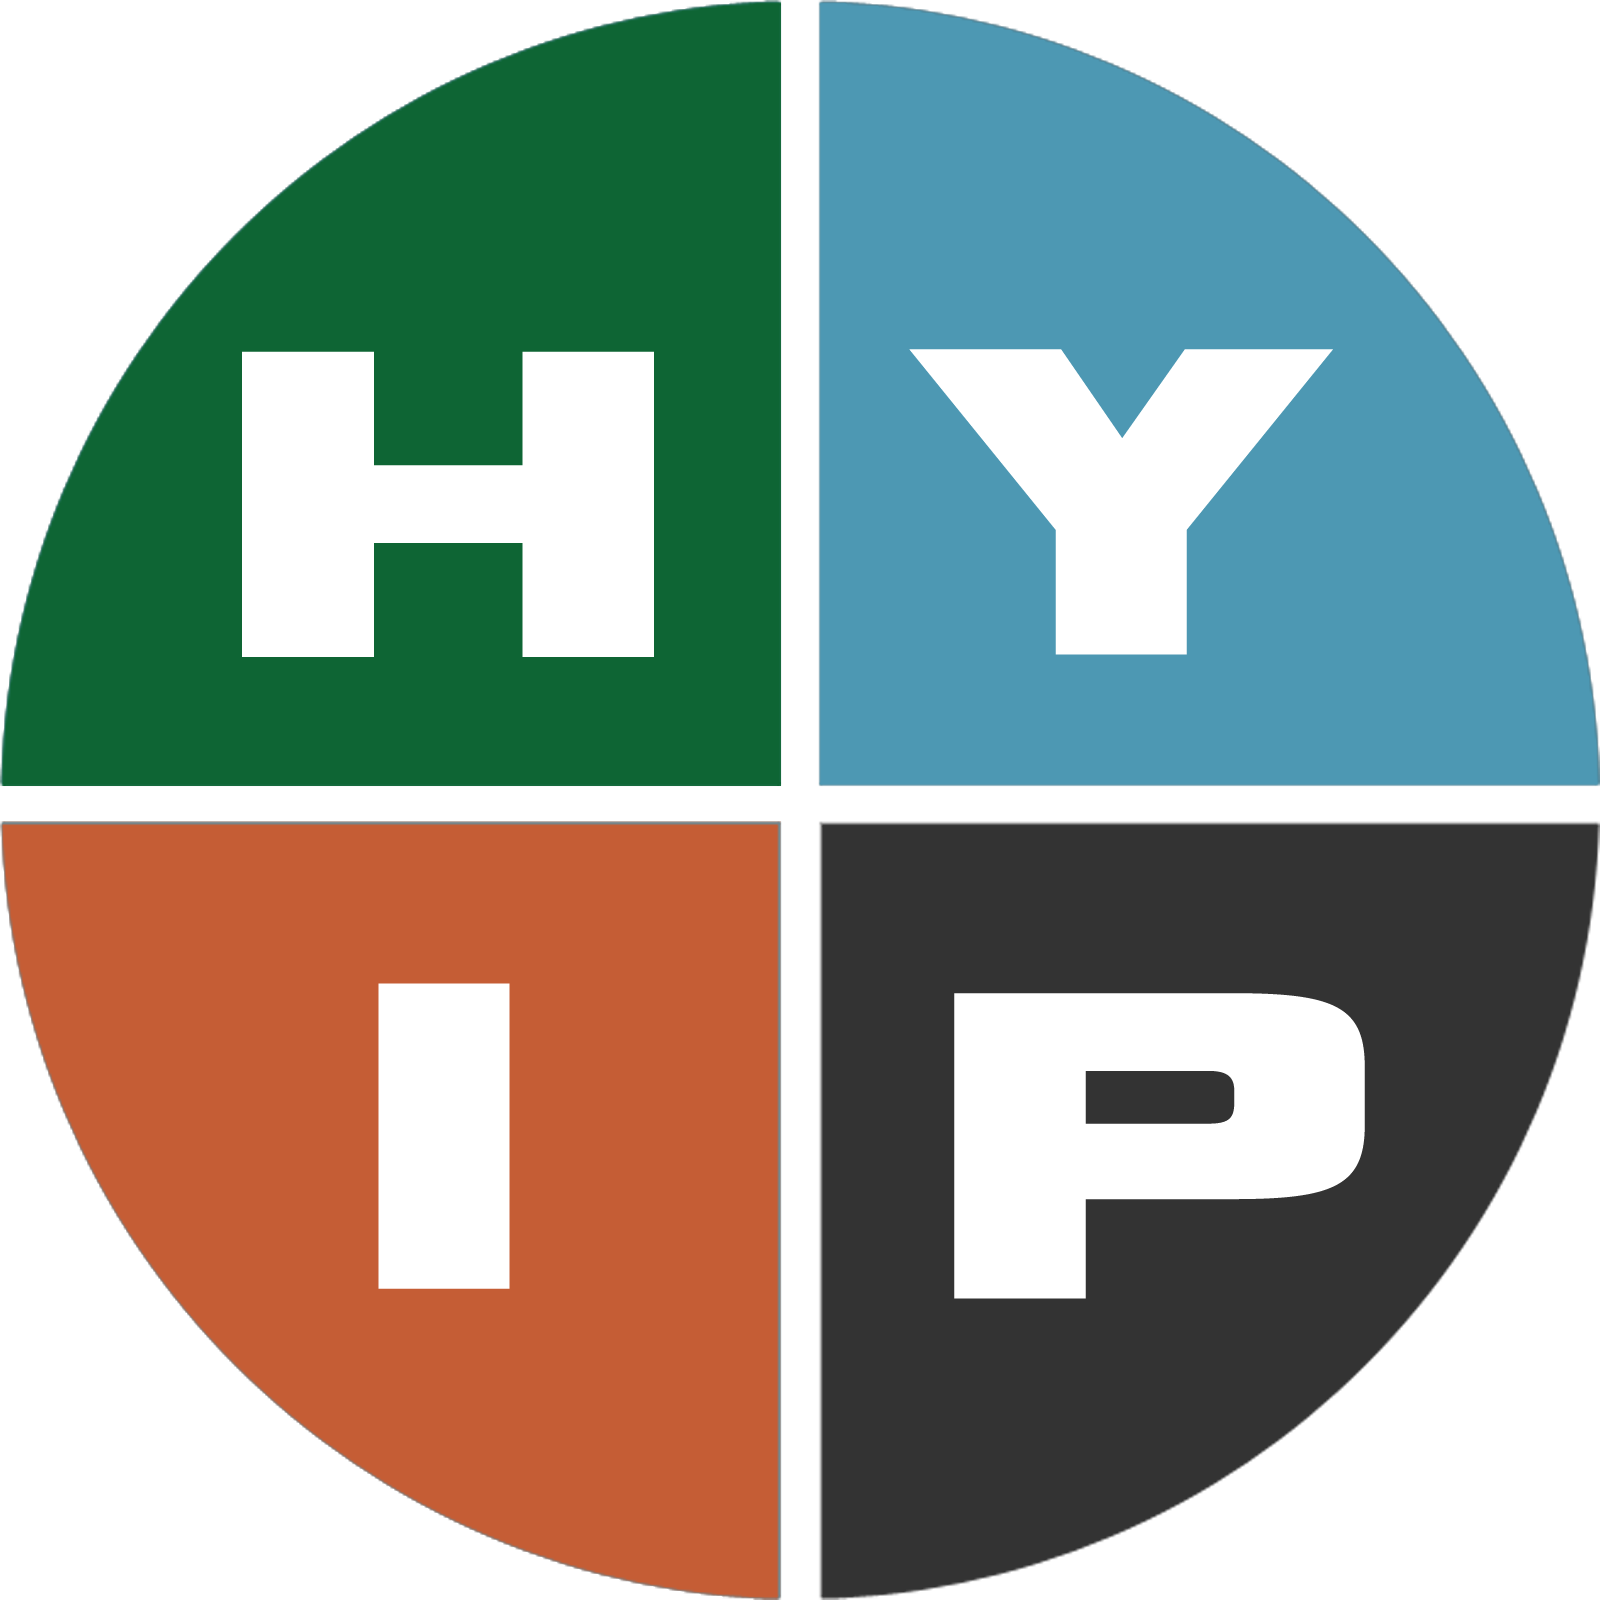 Hyip Investment Projects :: Photos, videos, logos, illustrations and branding :: Behance